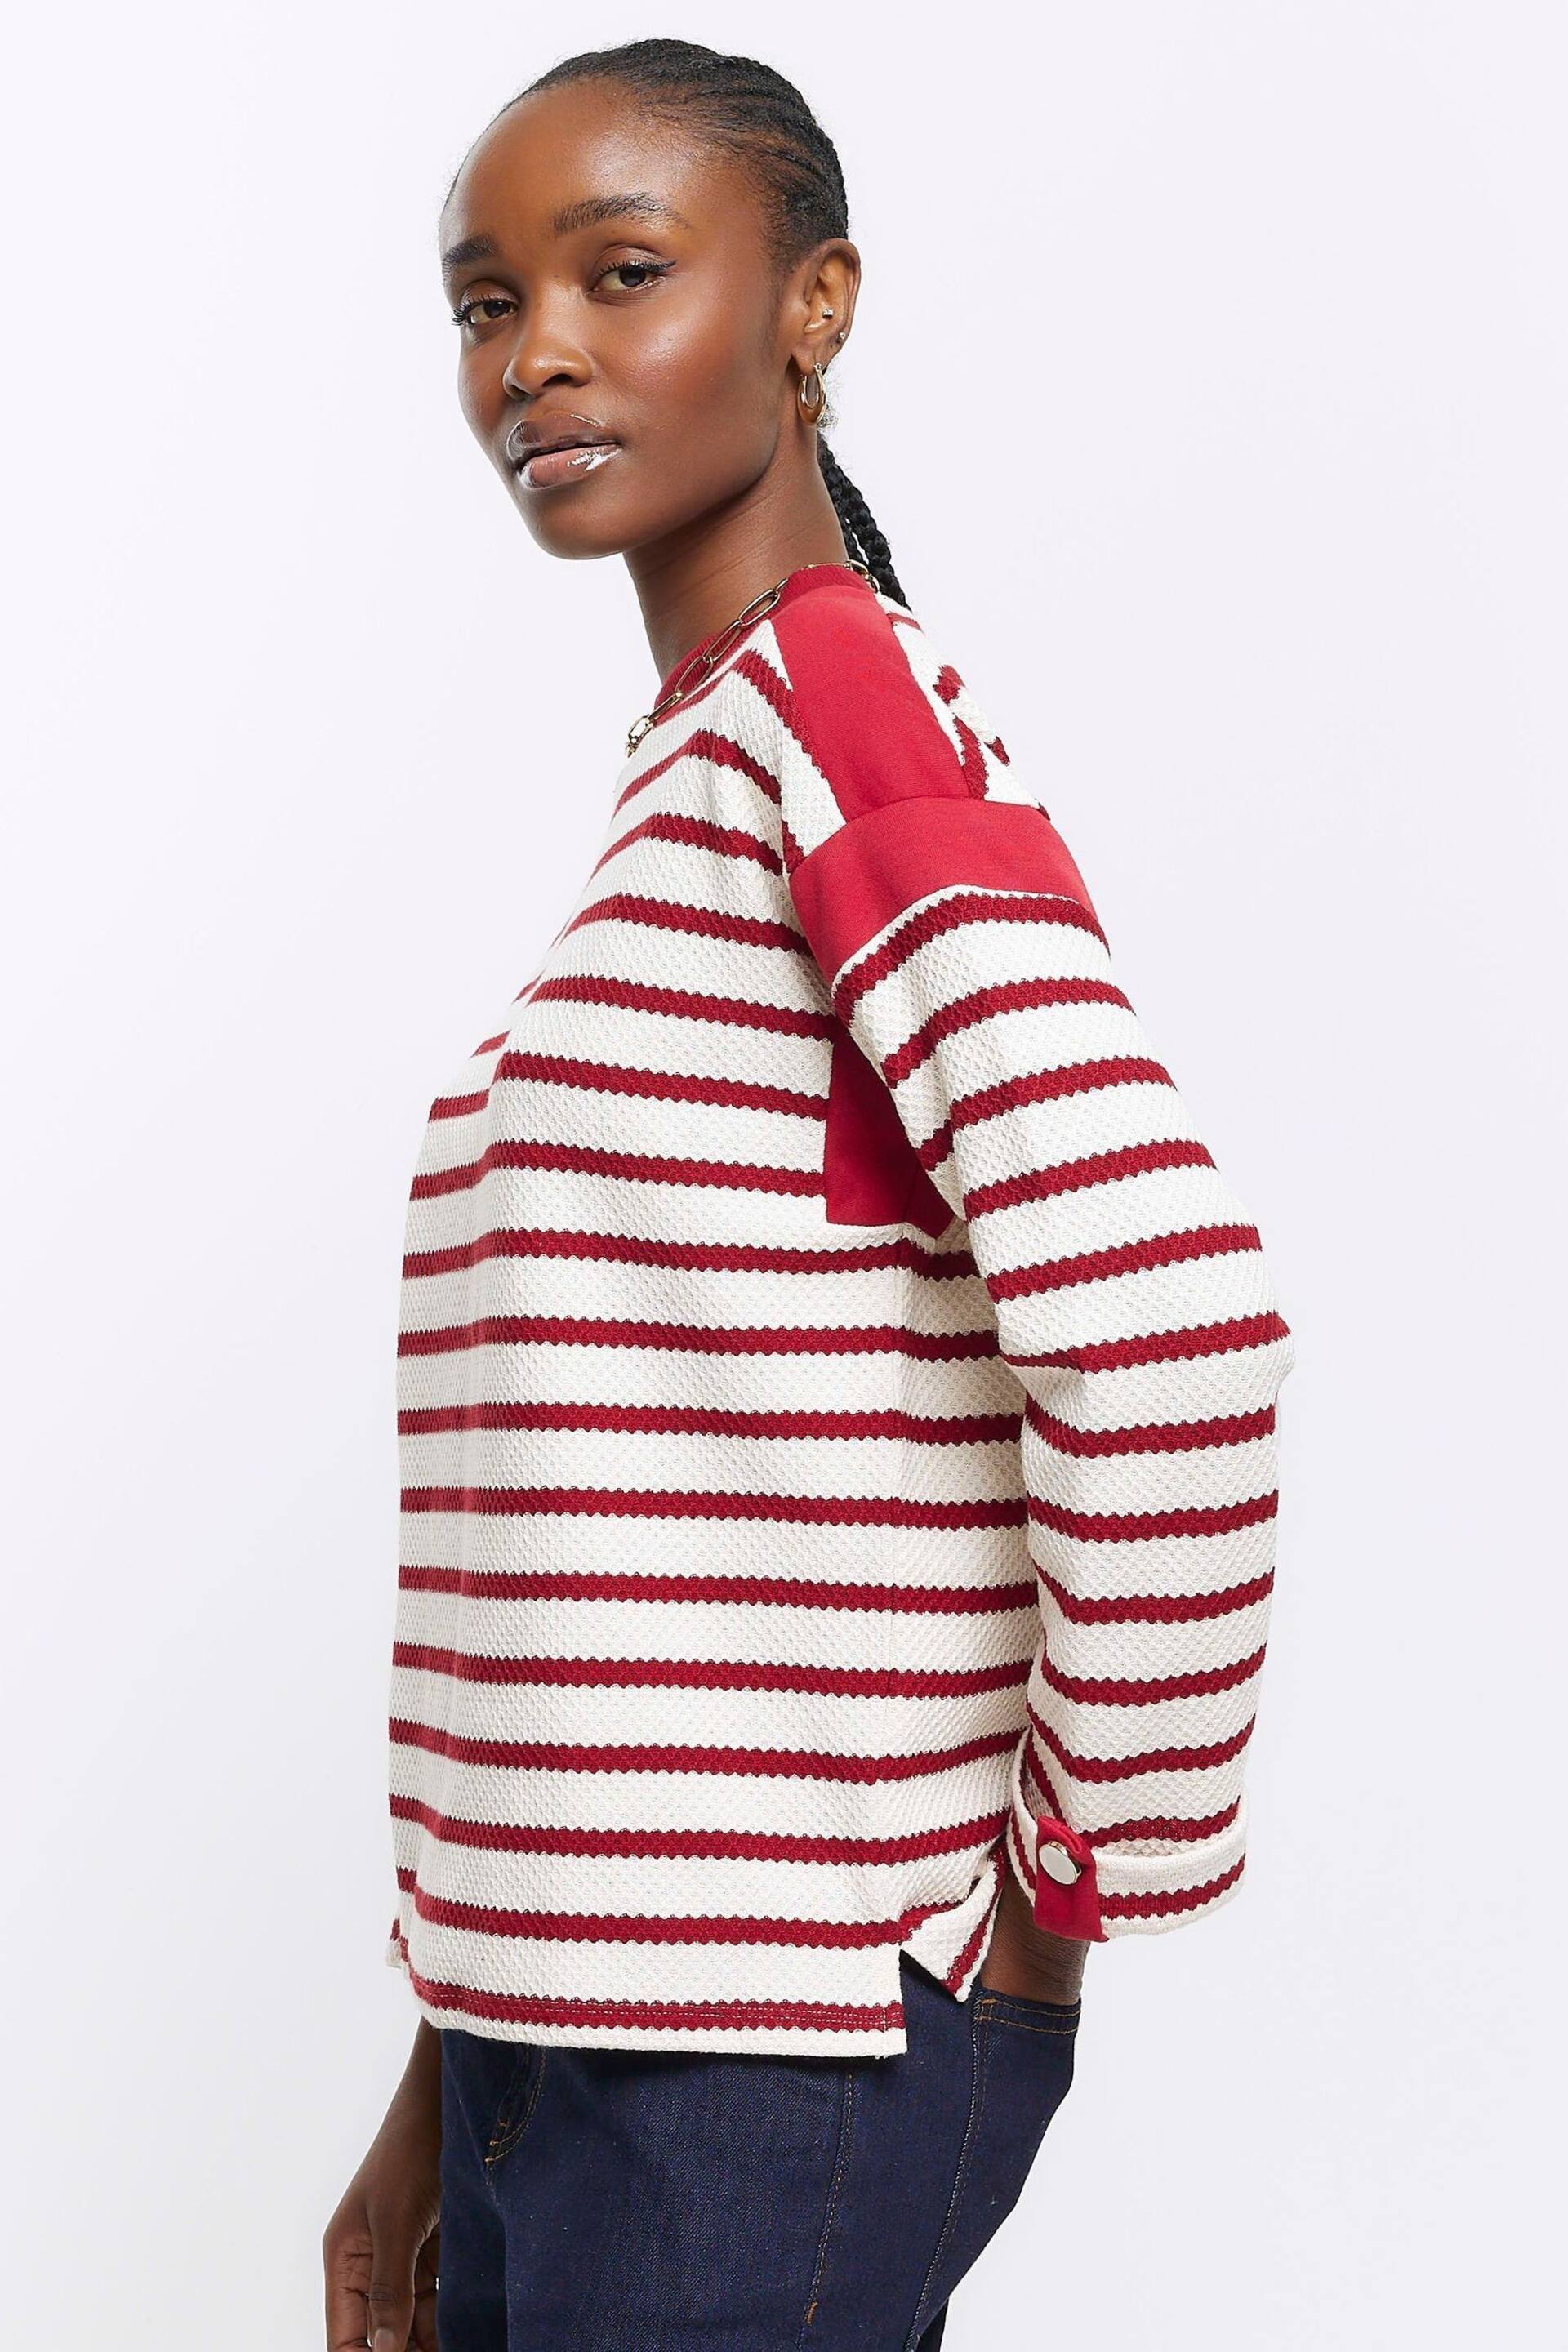 River Island Red Stripe Chuck On Sweat Top - Image 3 of 6